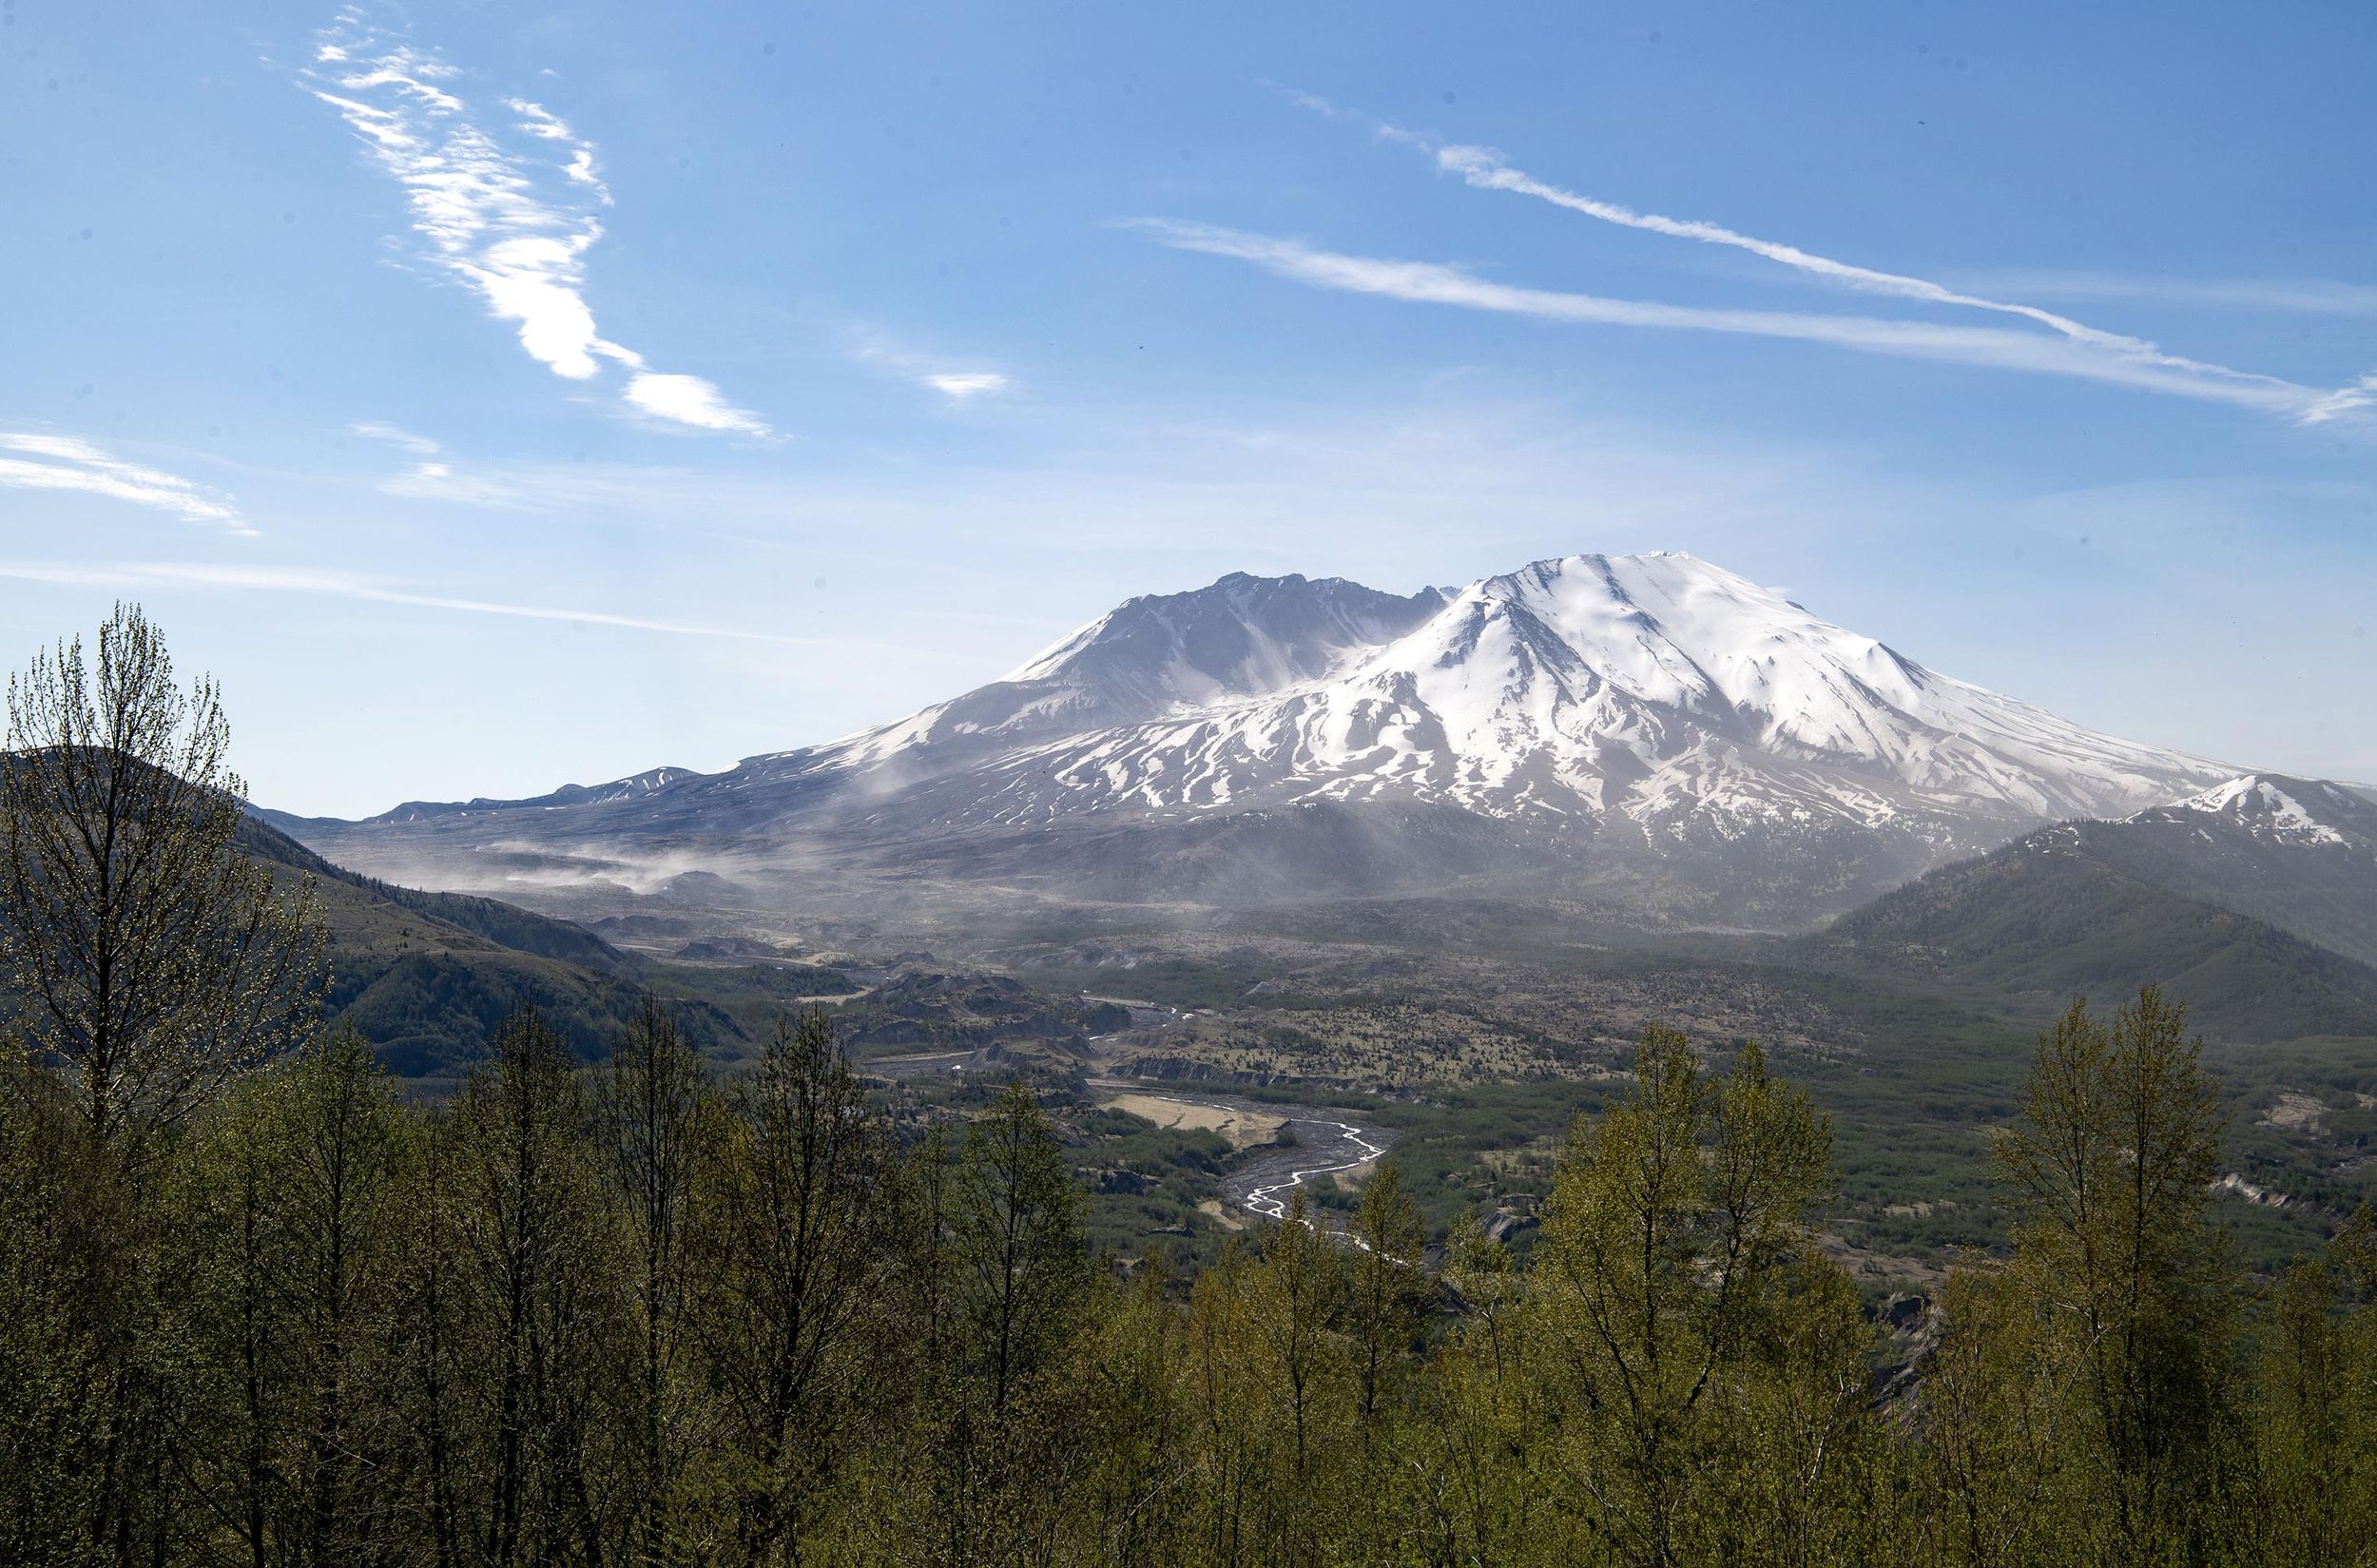 Mountain of change 40 years after the eruption of Mount St. Helens